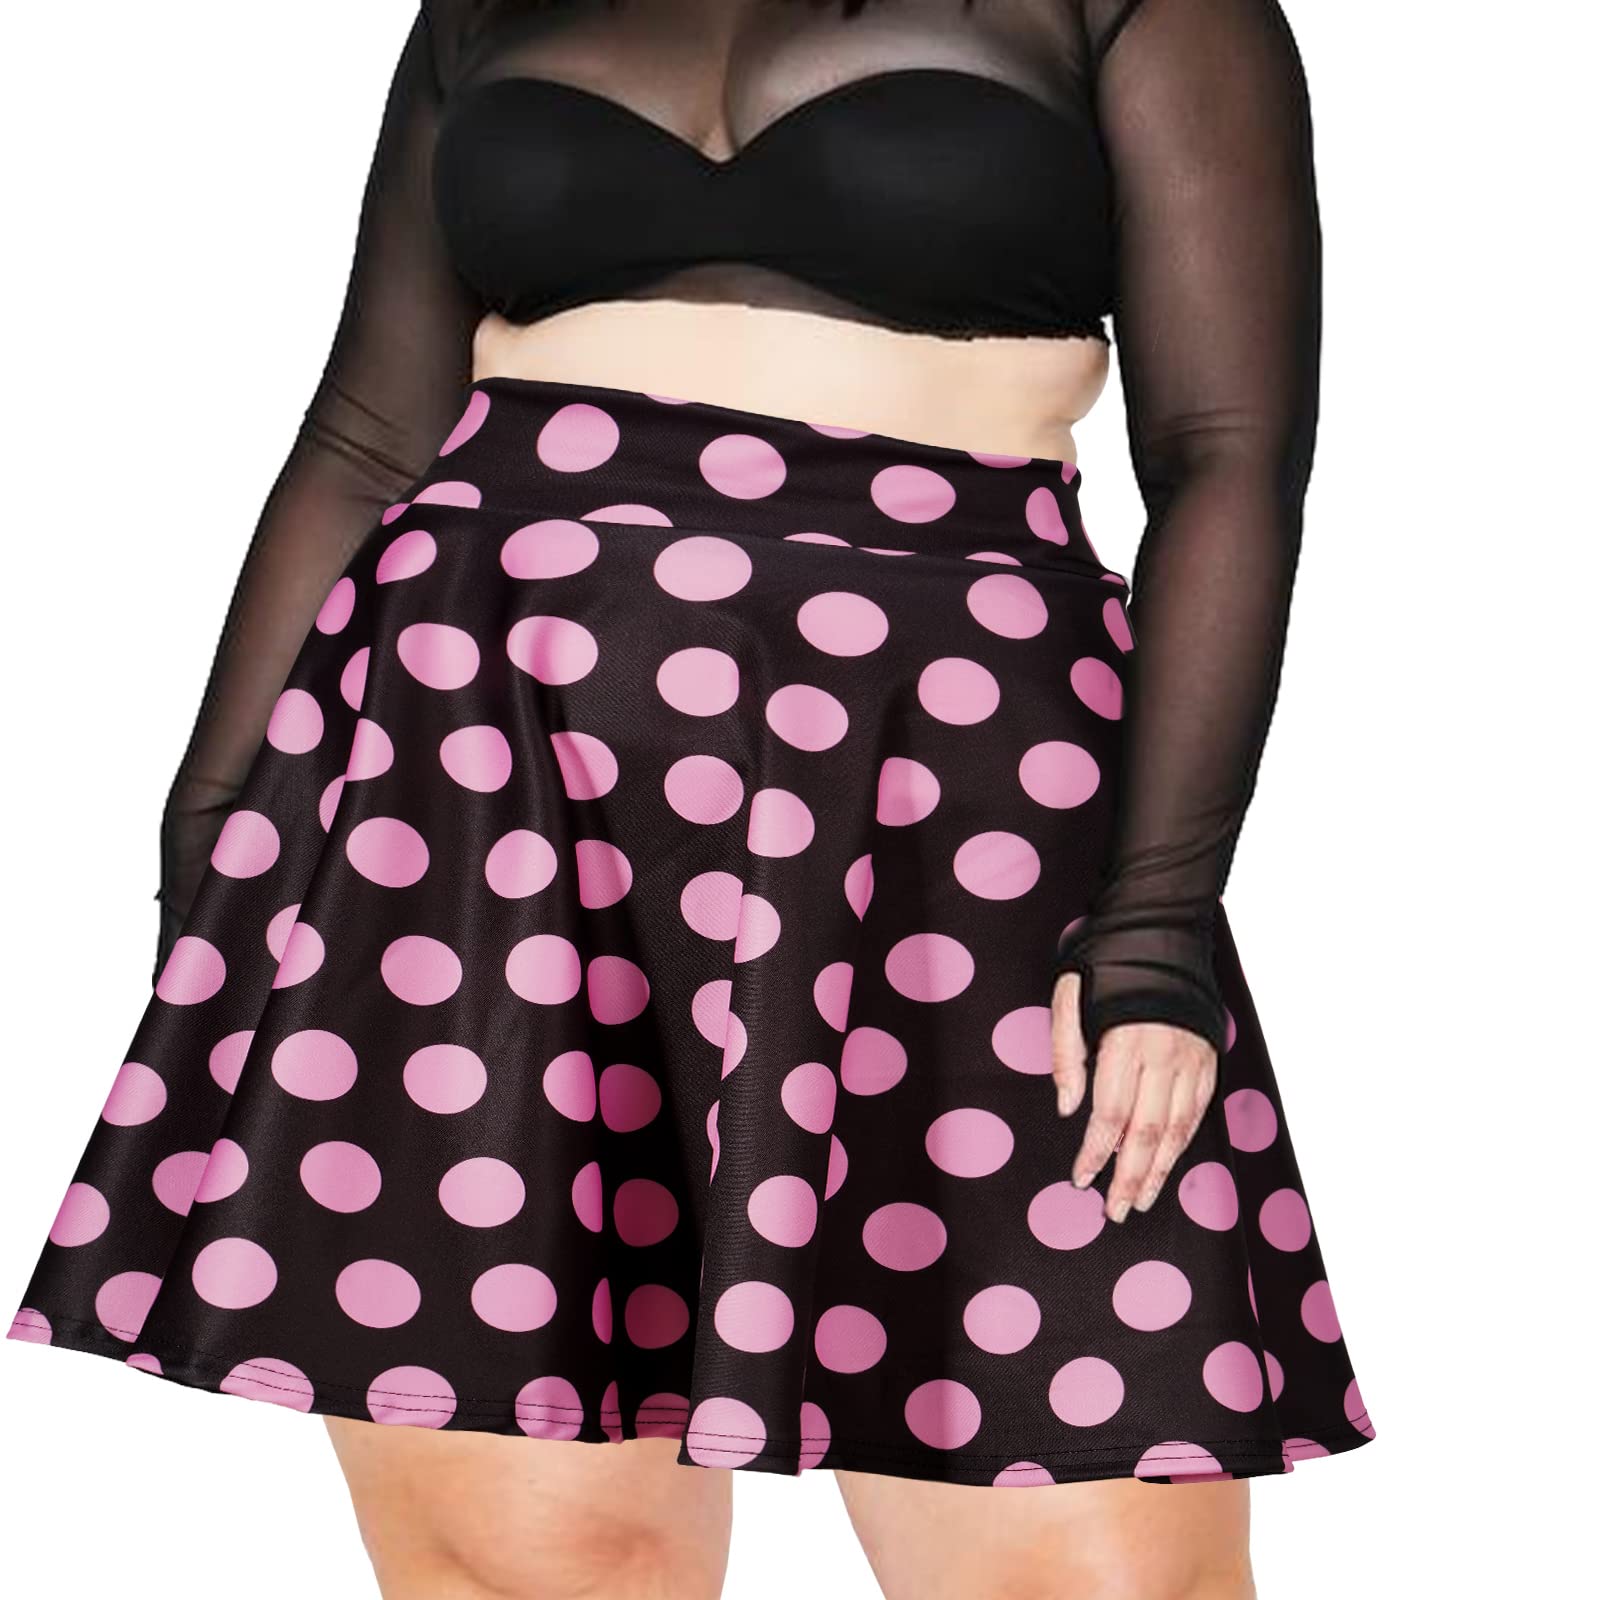 High Waisted Skater Skirt Plus Size-Black & Pink Dots - Moon Wood